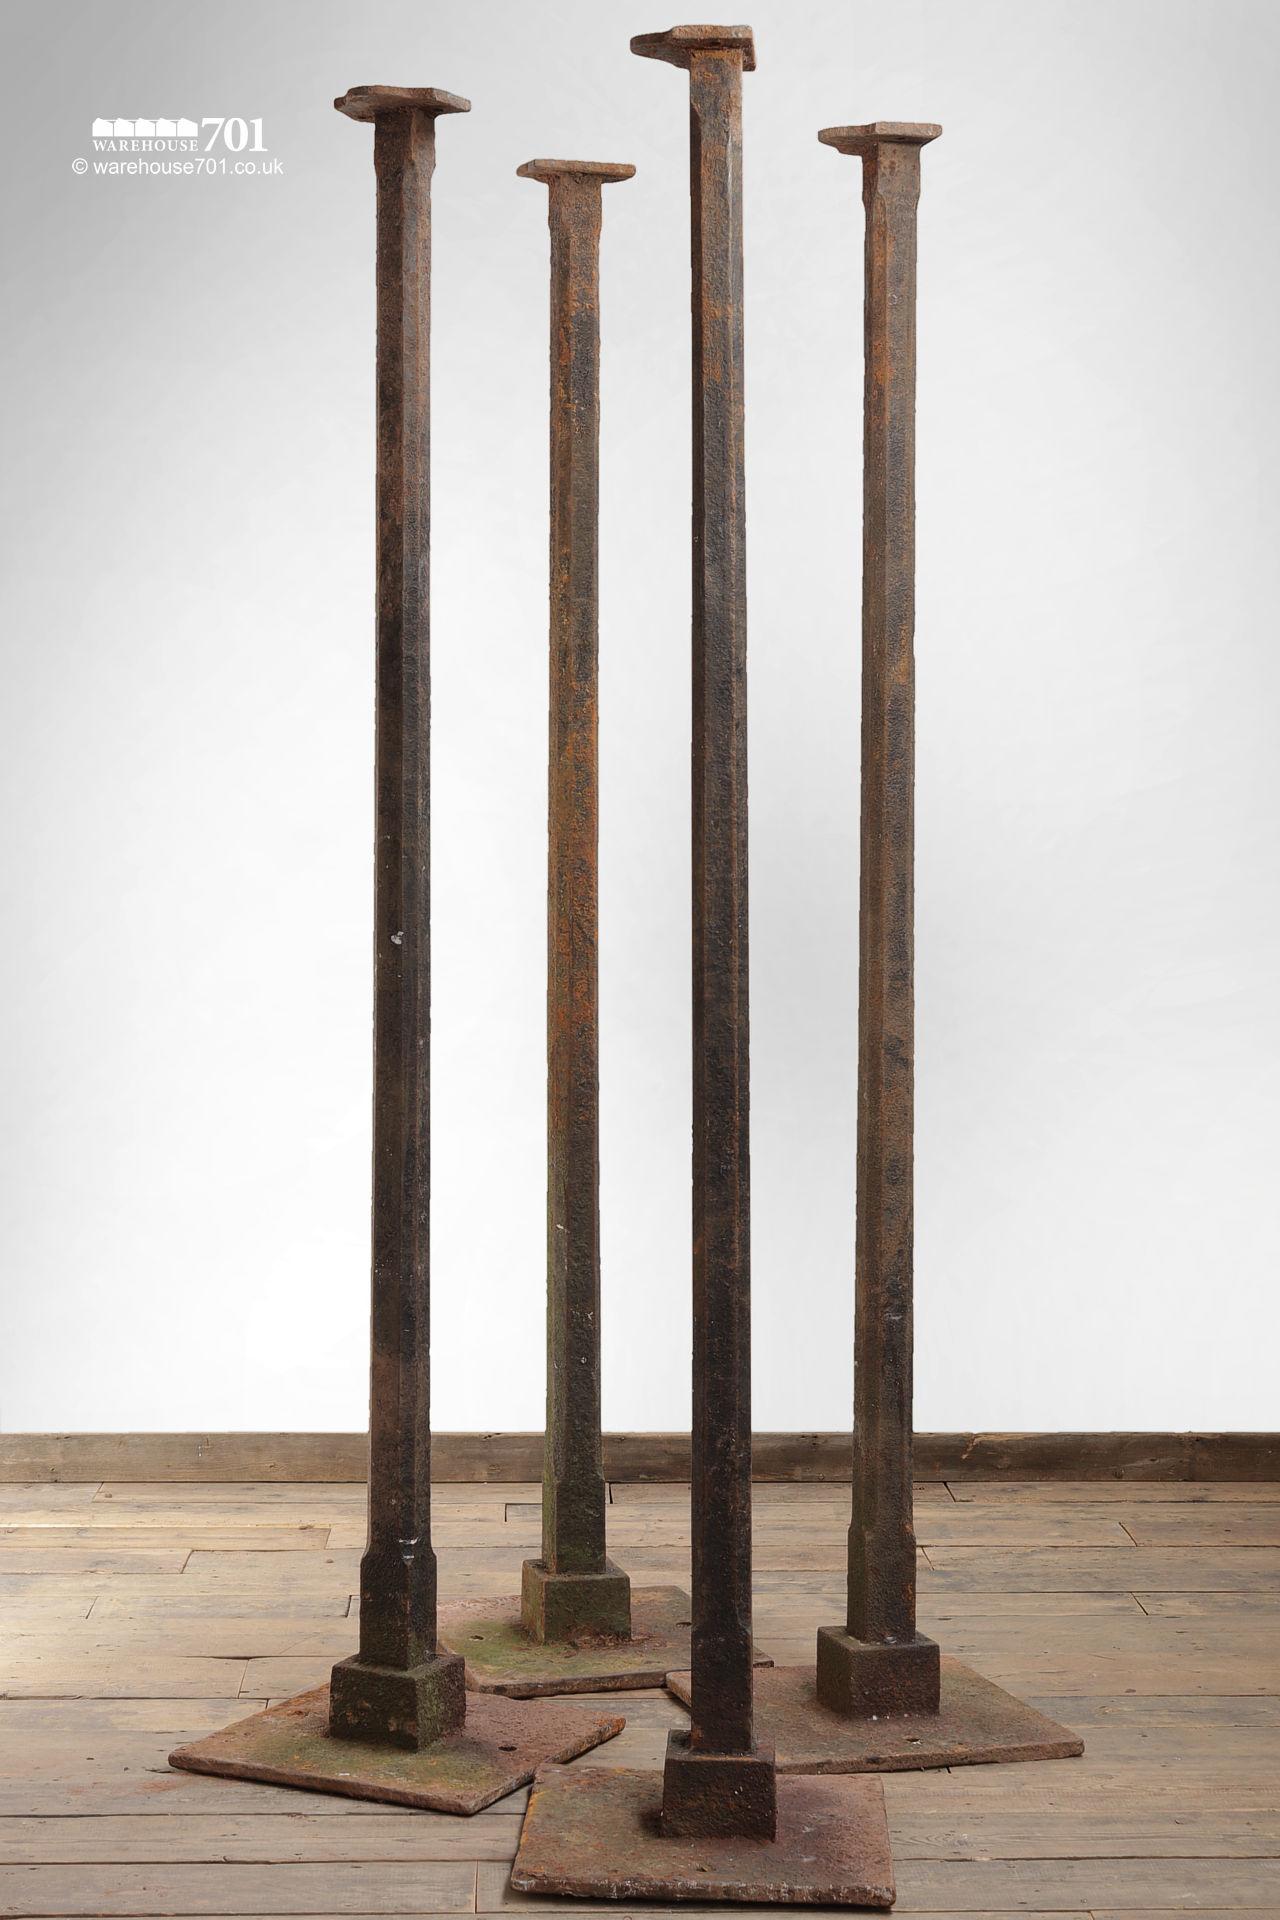 Set of Four Salvaged Cast Iron Columns, Supports or Pillars #1